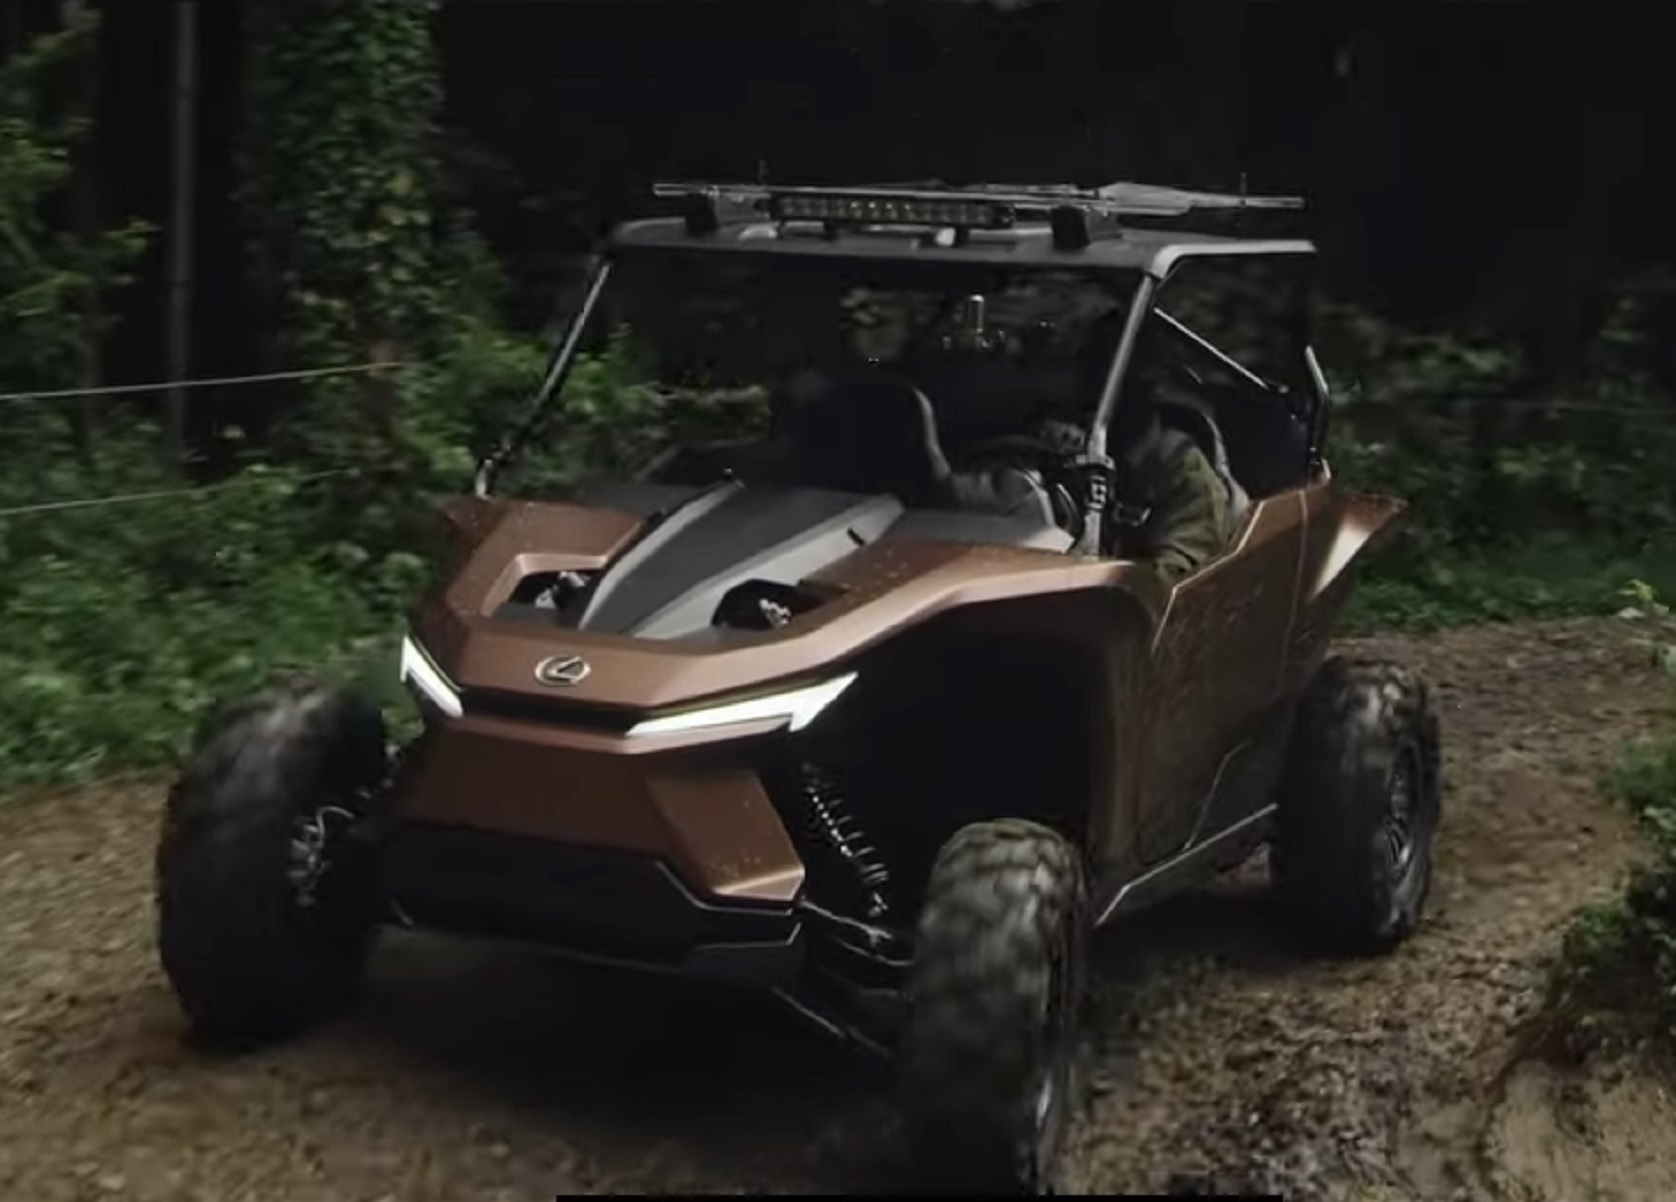 The copper-and-black Hydrogen-powered Lexus Recreational Off-Highway Vehicle Concept drives through a muddy forest